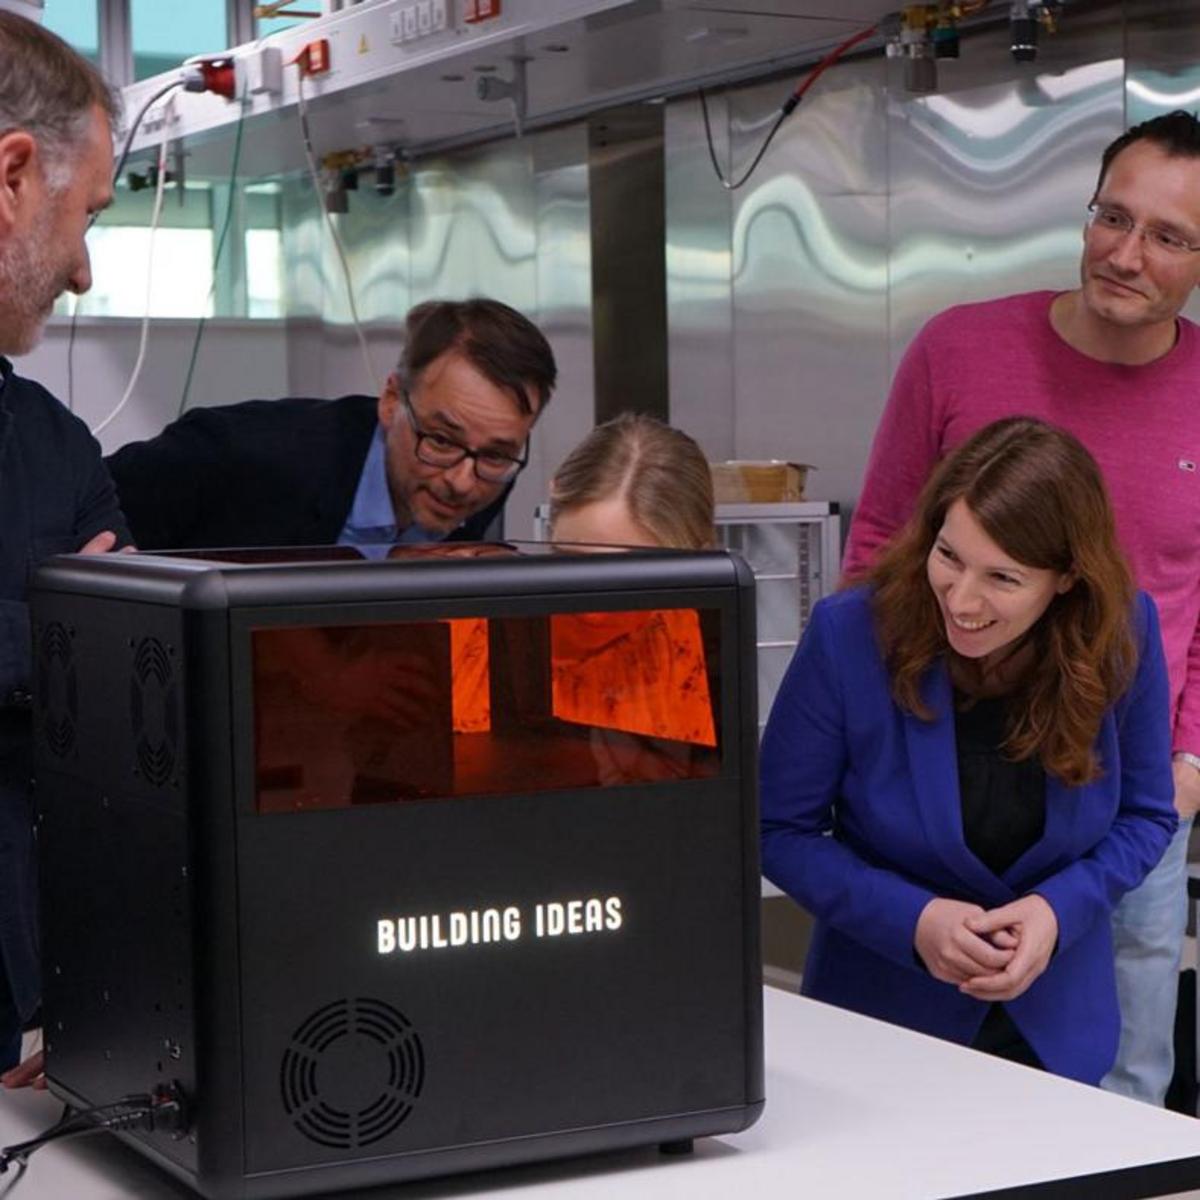 People examine and admire the Xube, a new type of 3D printer from Xolo Gmbh in Berlin Adlershof